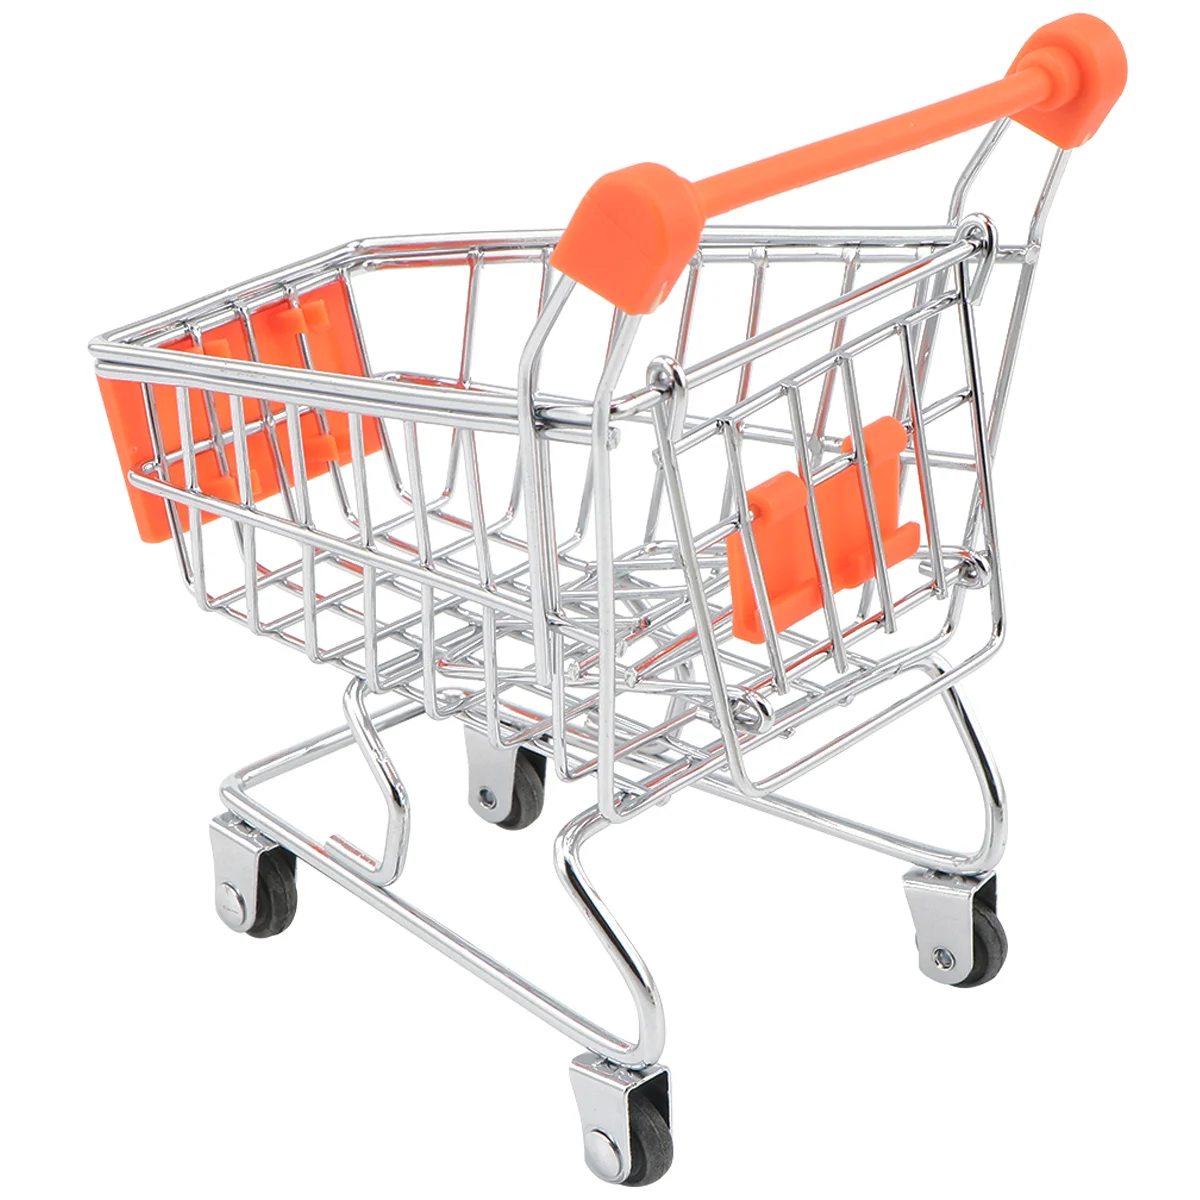 

1pc Mini Shopping Cart Children Pretend Play Toy Iron Makeup Storage Grocery Cart Trolley with Electroplating (Random Color)